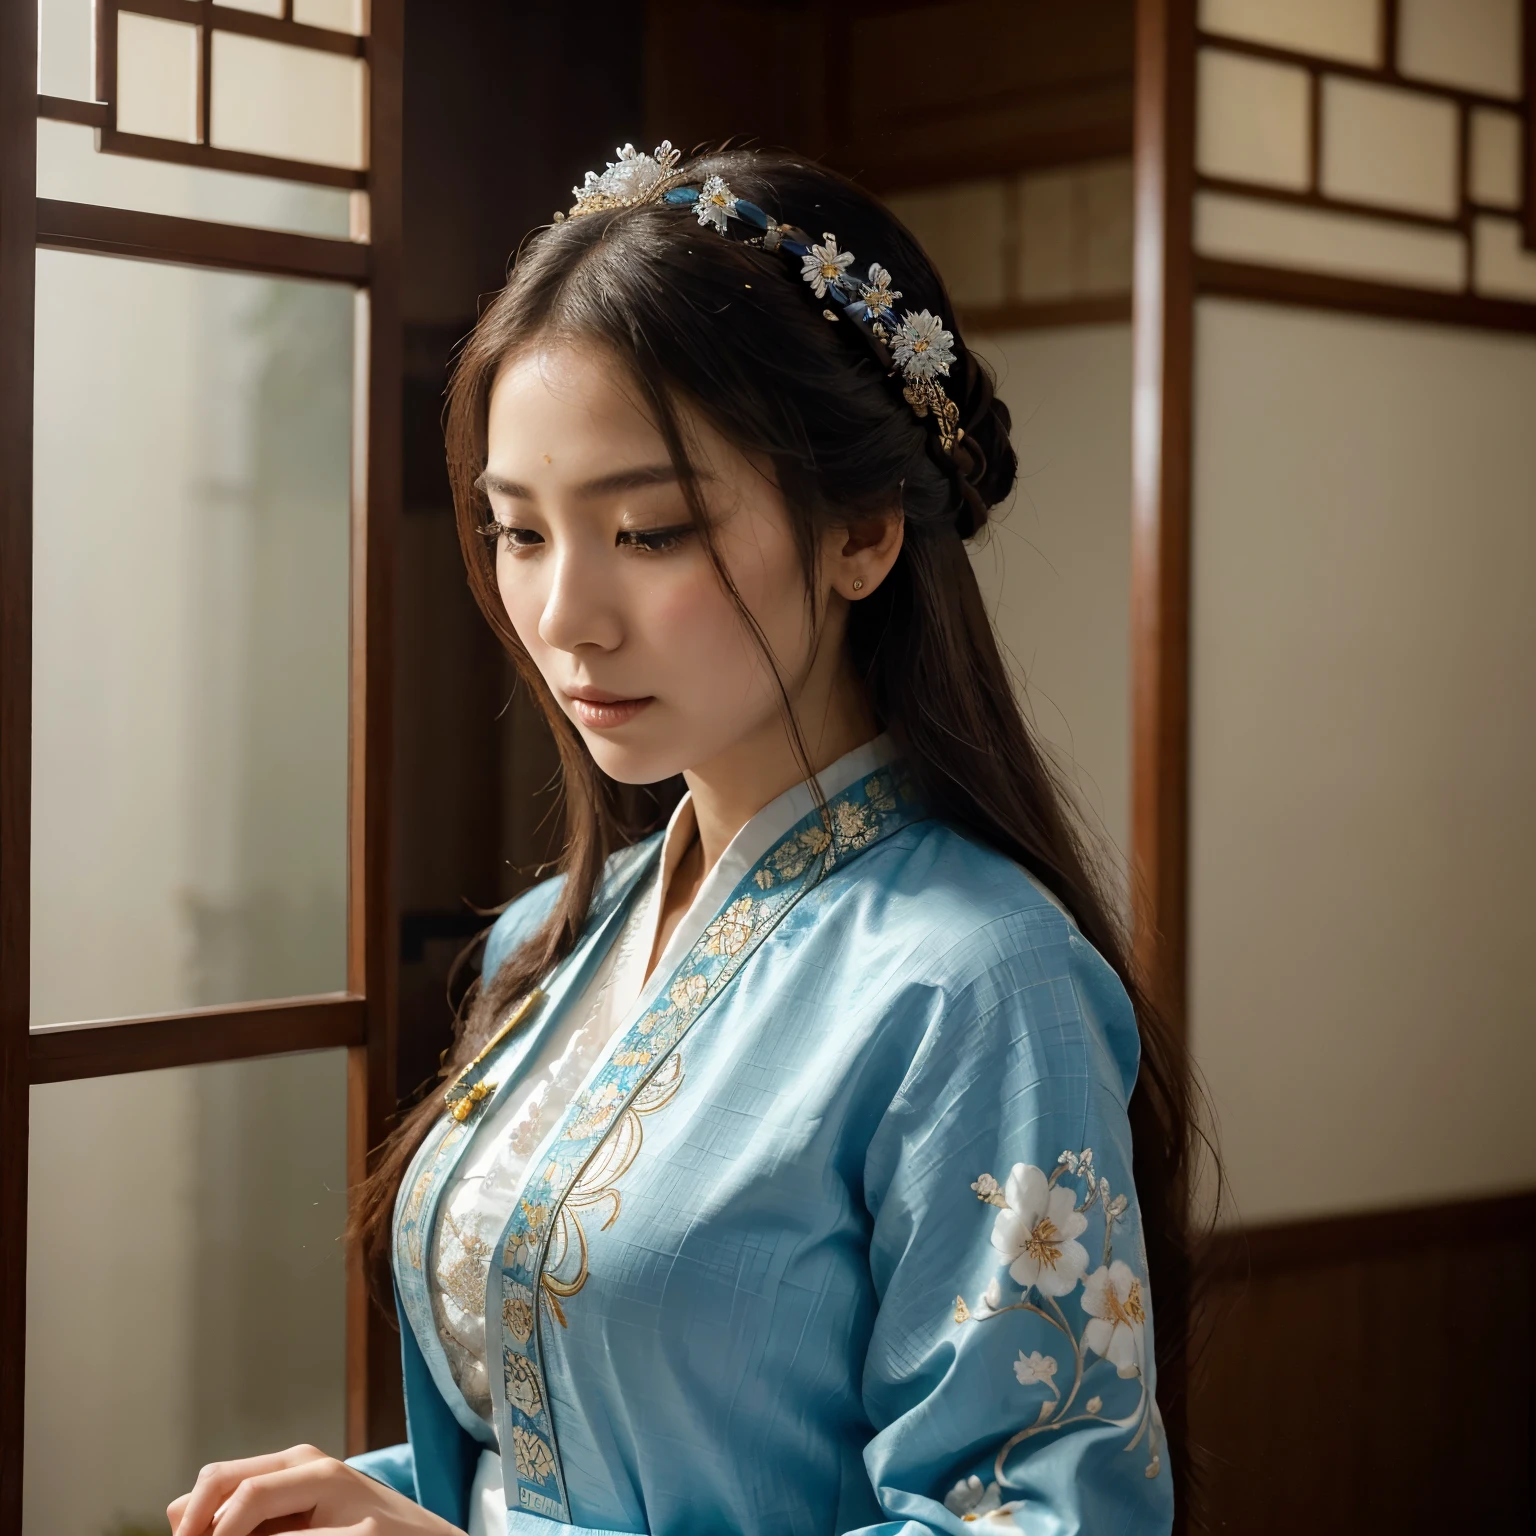 The figure is a woman portrayed in a graceful pose with a serene and contemplative expression. Her attire and styling suggest traditional East Asian influences, likely a form of hanfu with its flowing layers and intricate patterns. The garment is detailed with floral patterns in shades of blue and white, which may represent a specific type of porcelain design. The use of blue is prominent, suggesting a connection to nobility or serenity in some East Asian cultures. The woman's hair is long, flowing, and styled traditionally with ornaments that include flowers and hanging beads or jewels. These hair accessories are elaborate, adding to the sense of elegance and refinement.